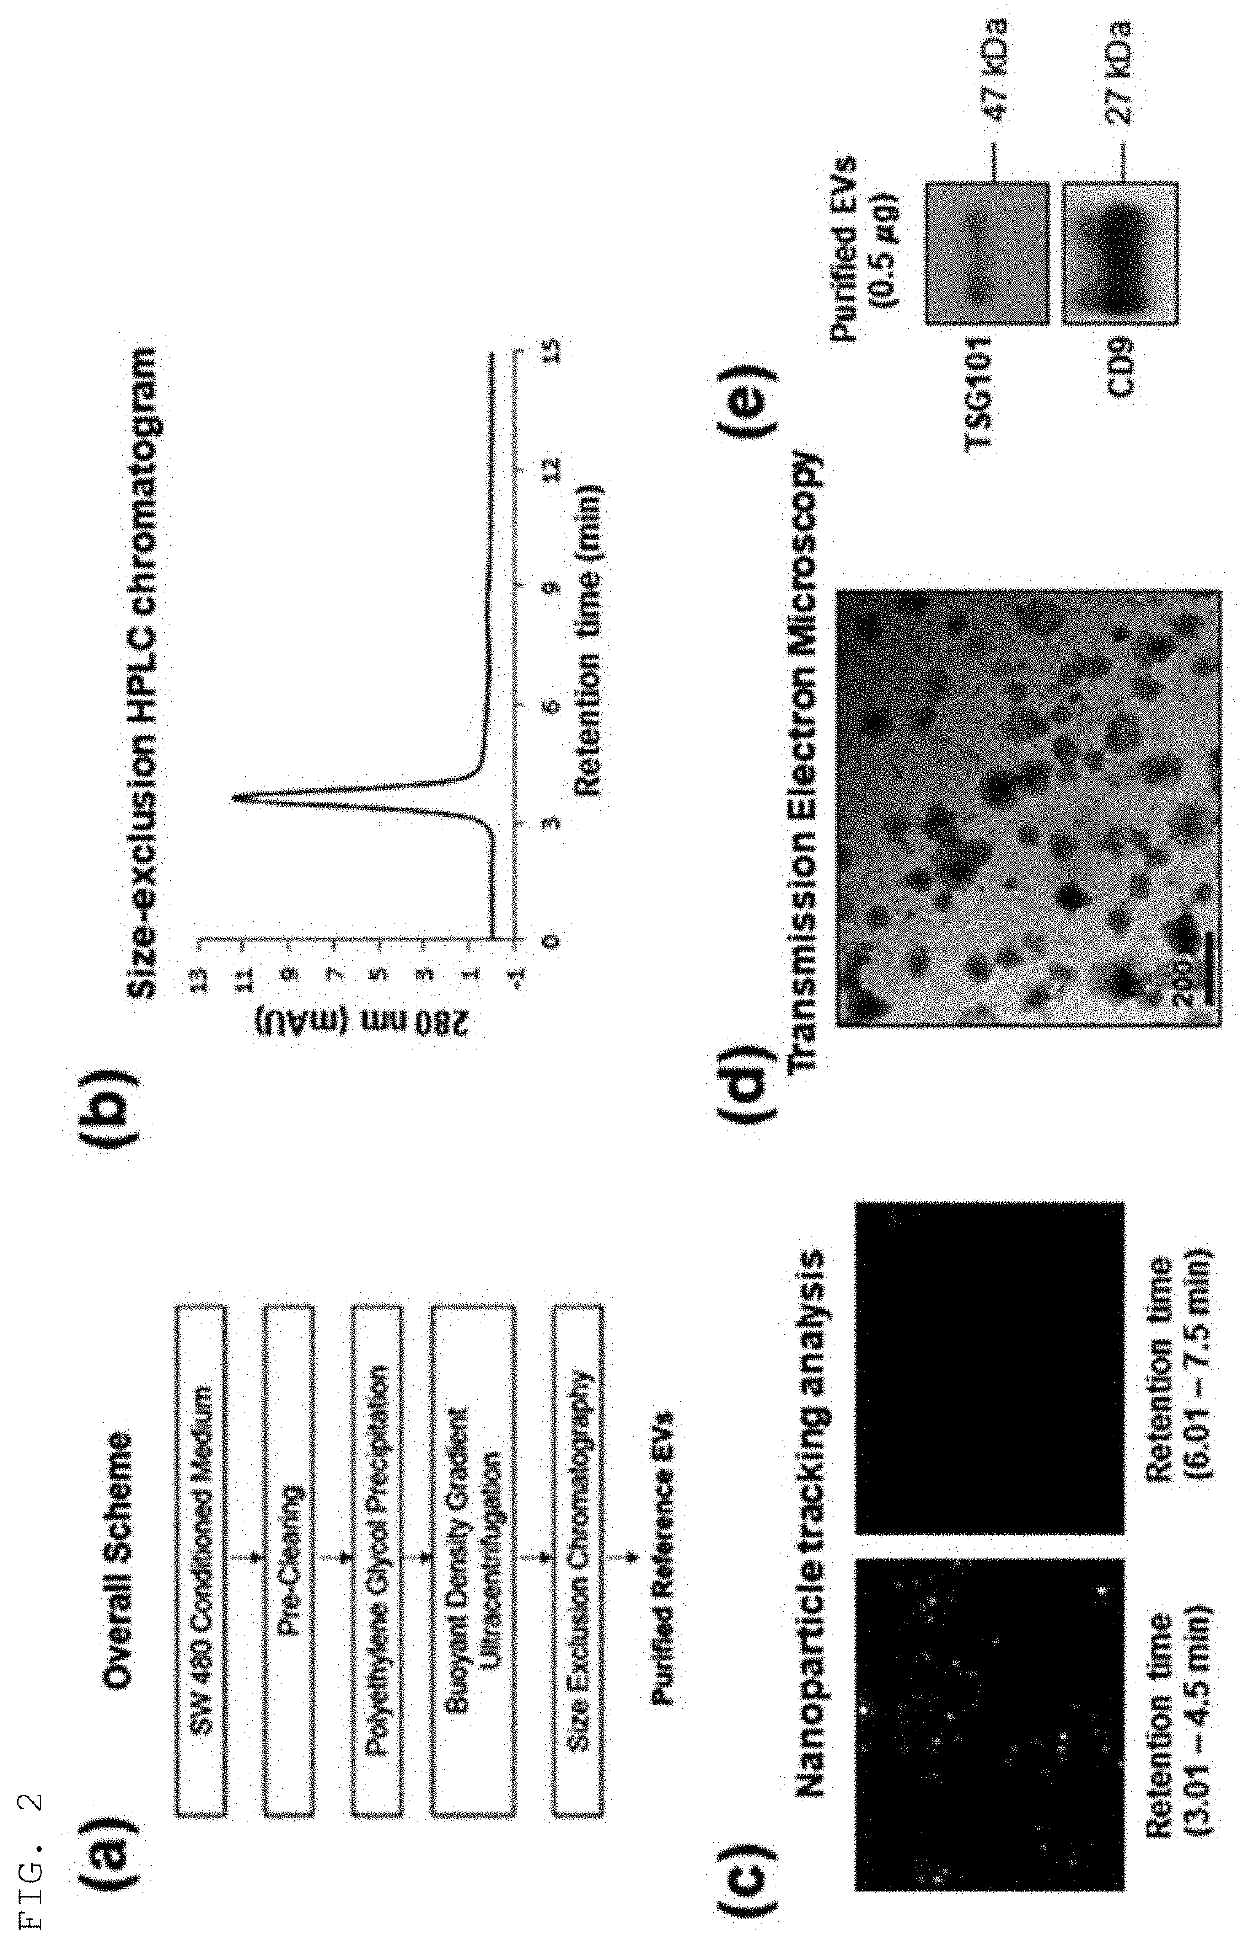 Method for isolating extracellular vesicles using cations